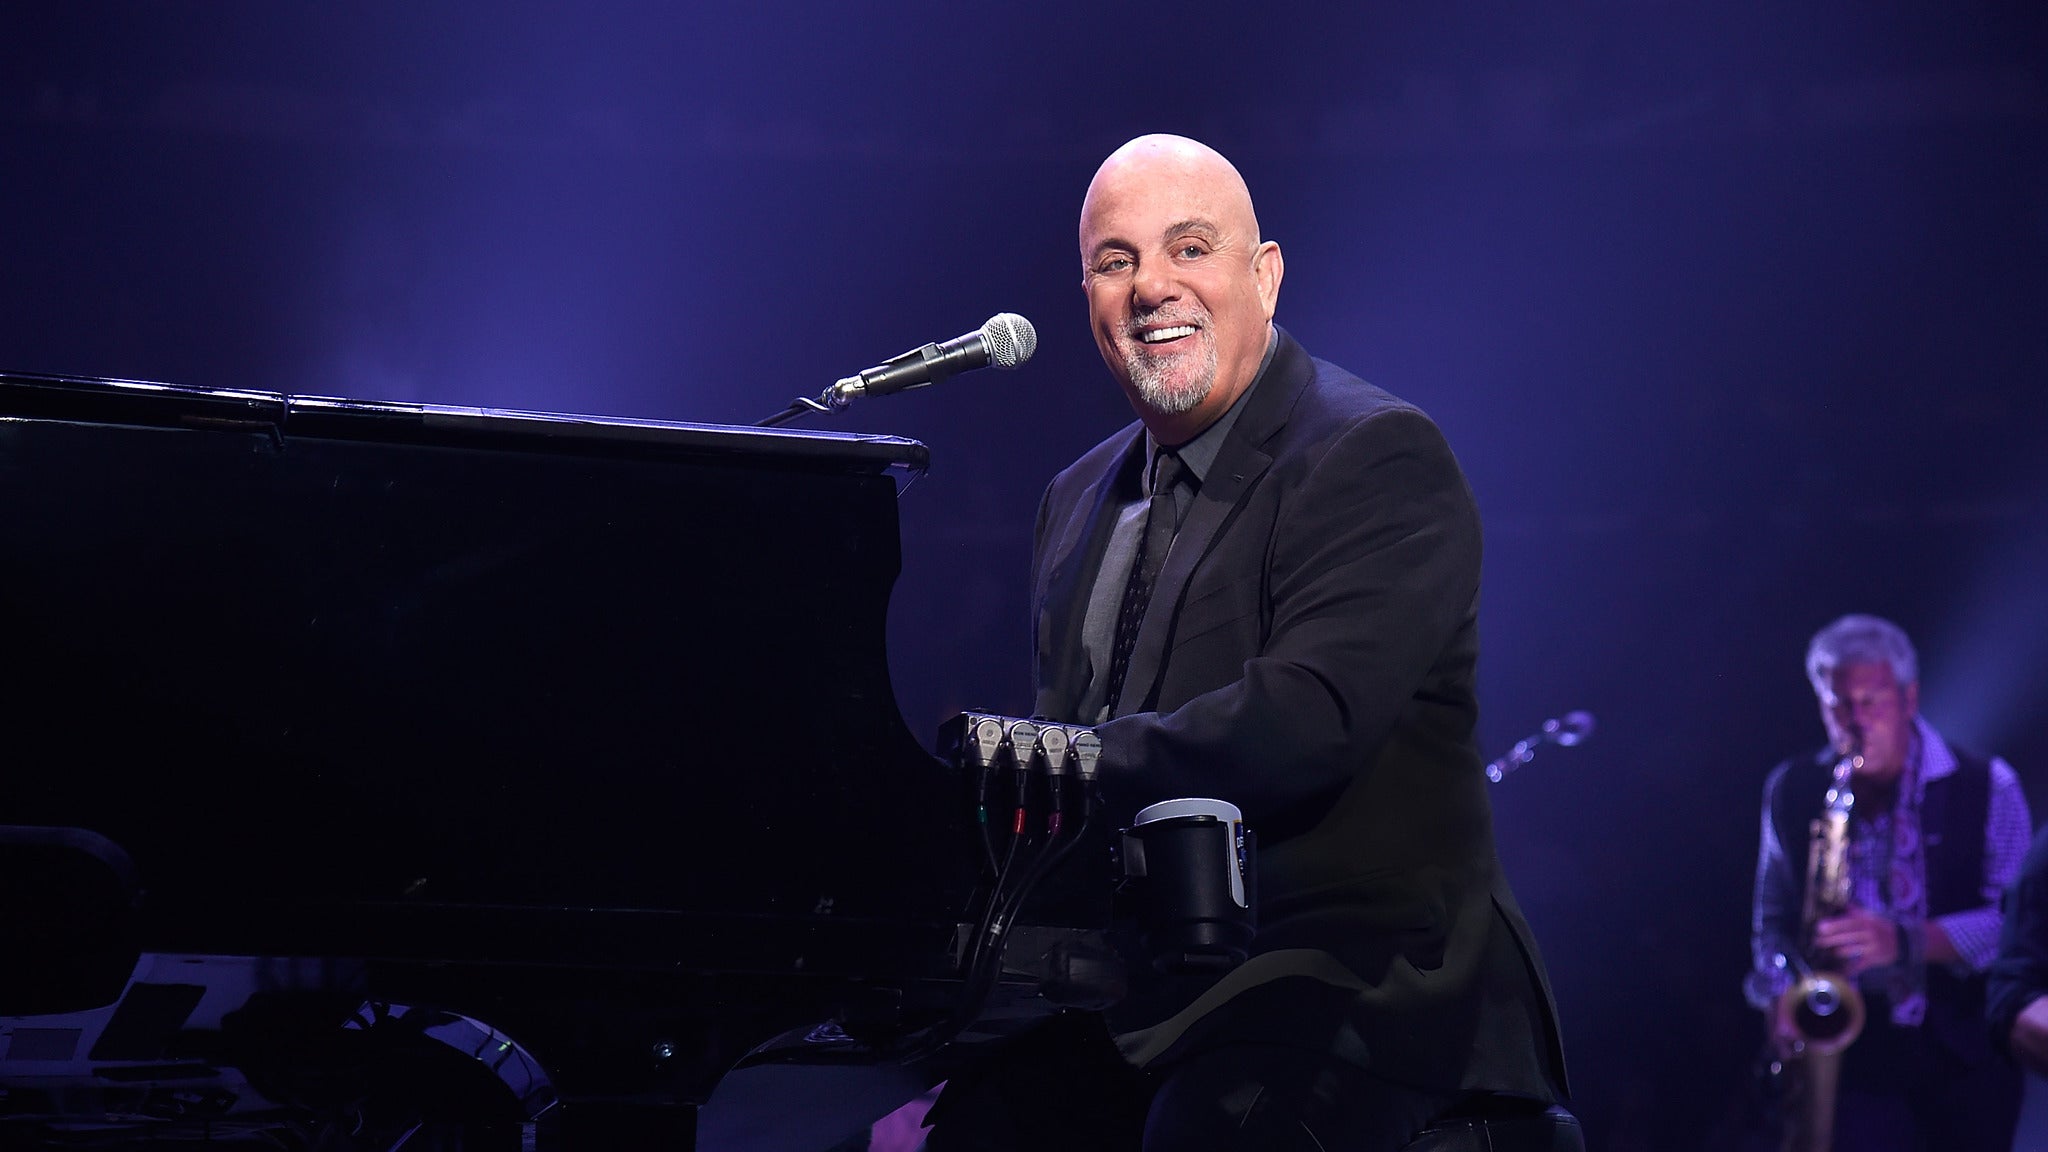 Billy Joel in Orchard Park promo photo for My One Buffalo presale offer code